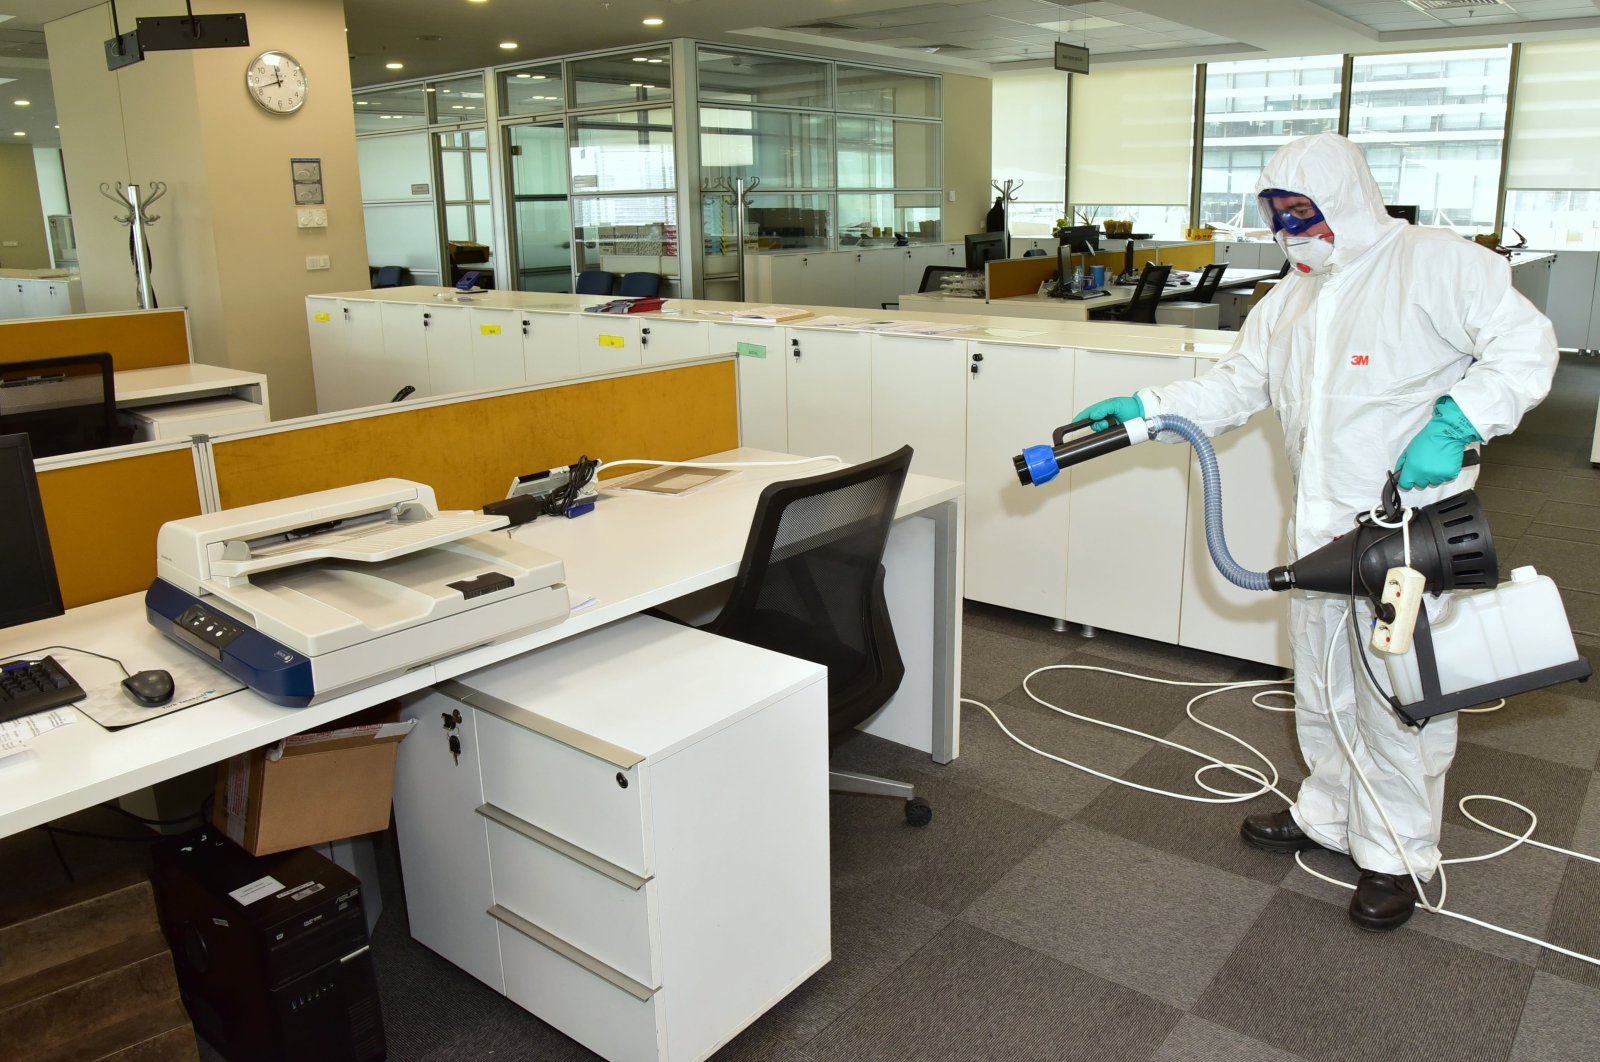 A man seen with a disinfection equippment in an office in Turkey. (IHA Photo)